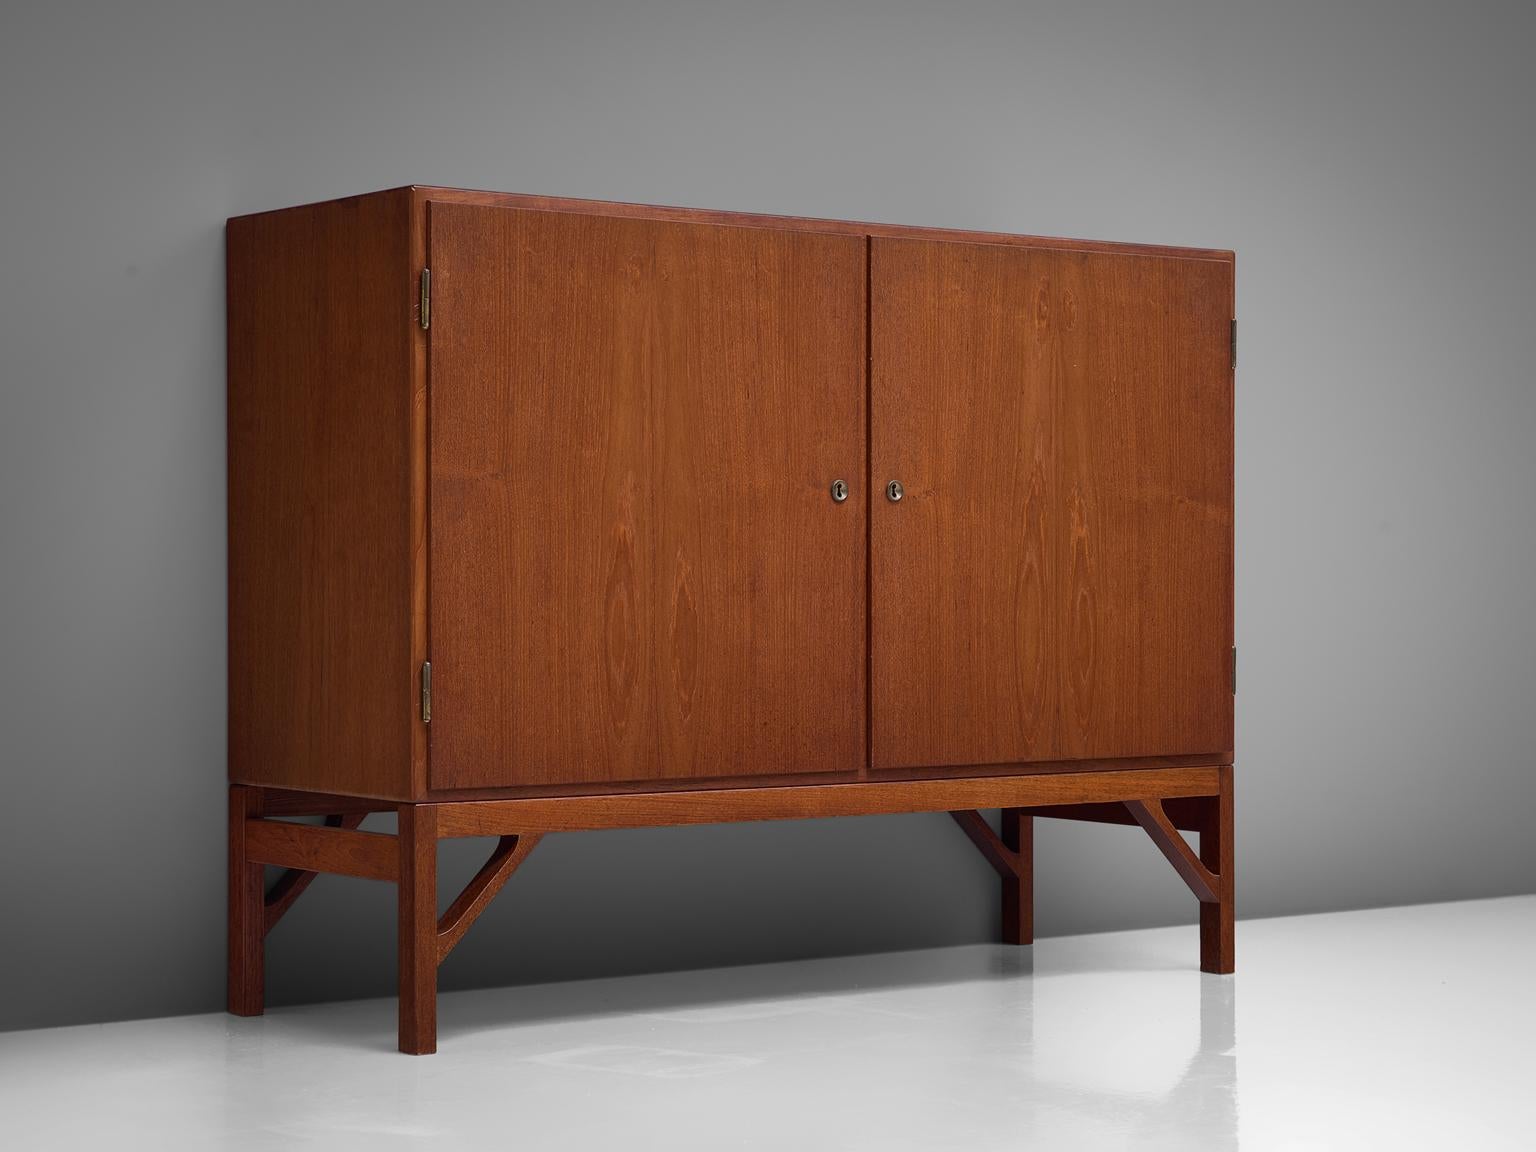 Børge Mogensen for FDB Møbler, cabinet in teak and brass, model A232, Denmark, 1950s.

The clear lines of this chest, characterize the well-known style of Mogensen. Very well proportioned and spacious, provided with a well-made base in solid teak.